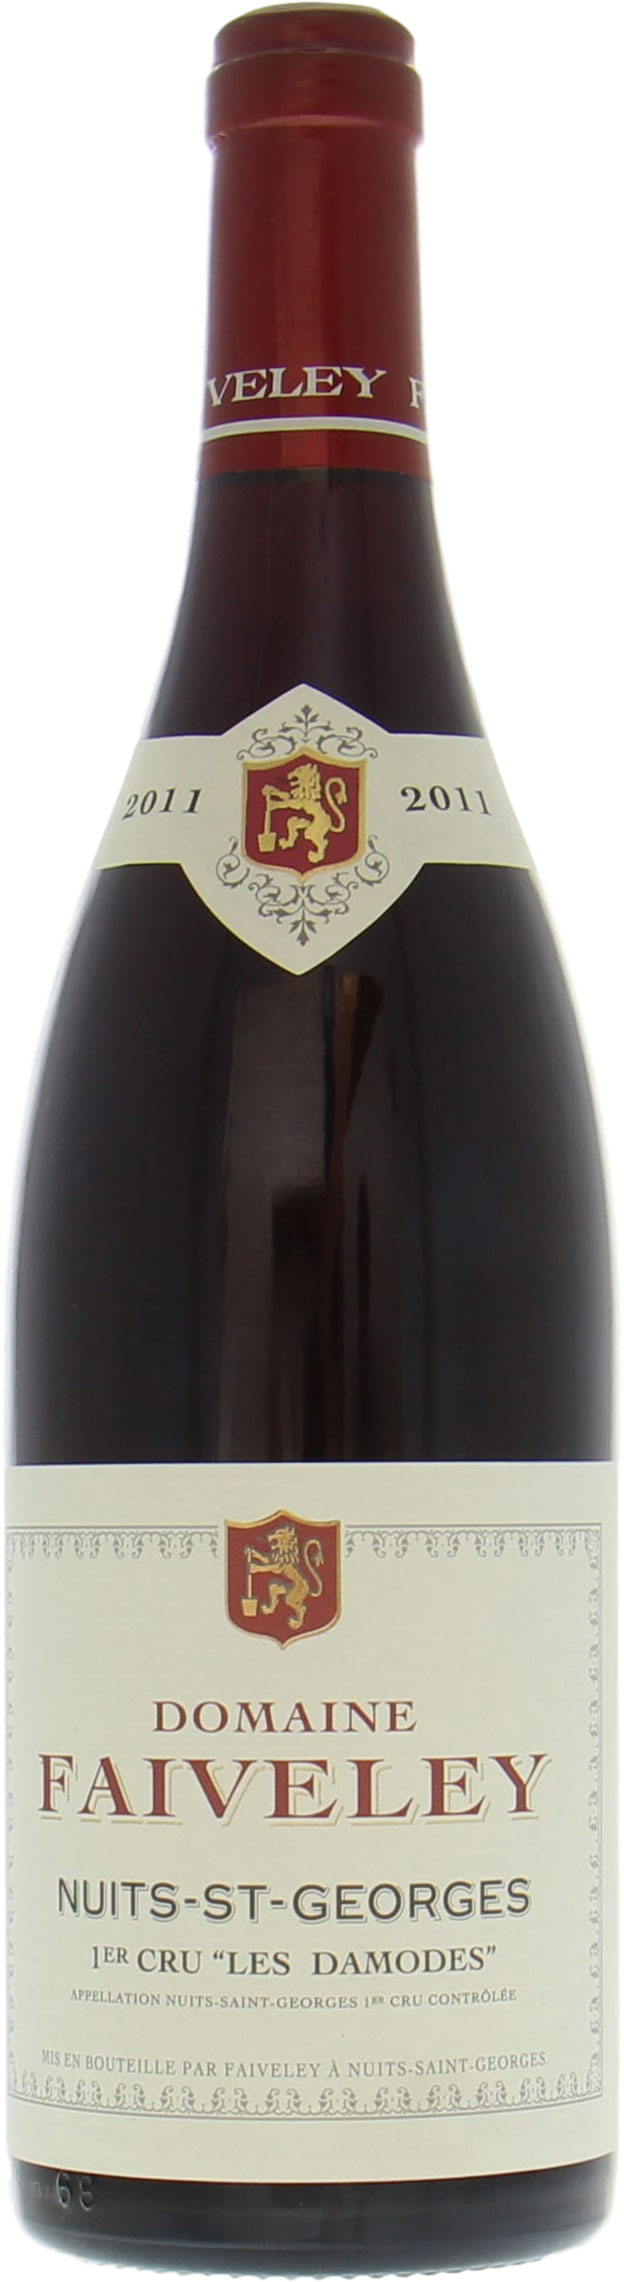 Faiveley - Nuits-St.-Georges Les Damodes 2011 Perfect